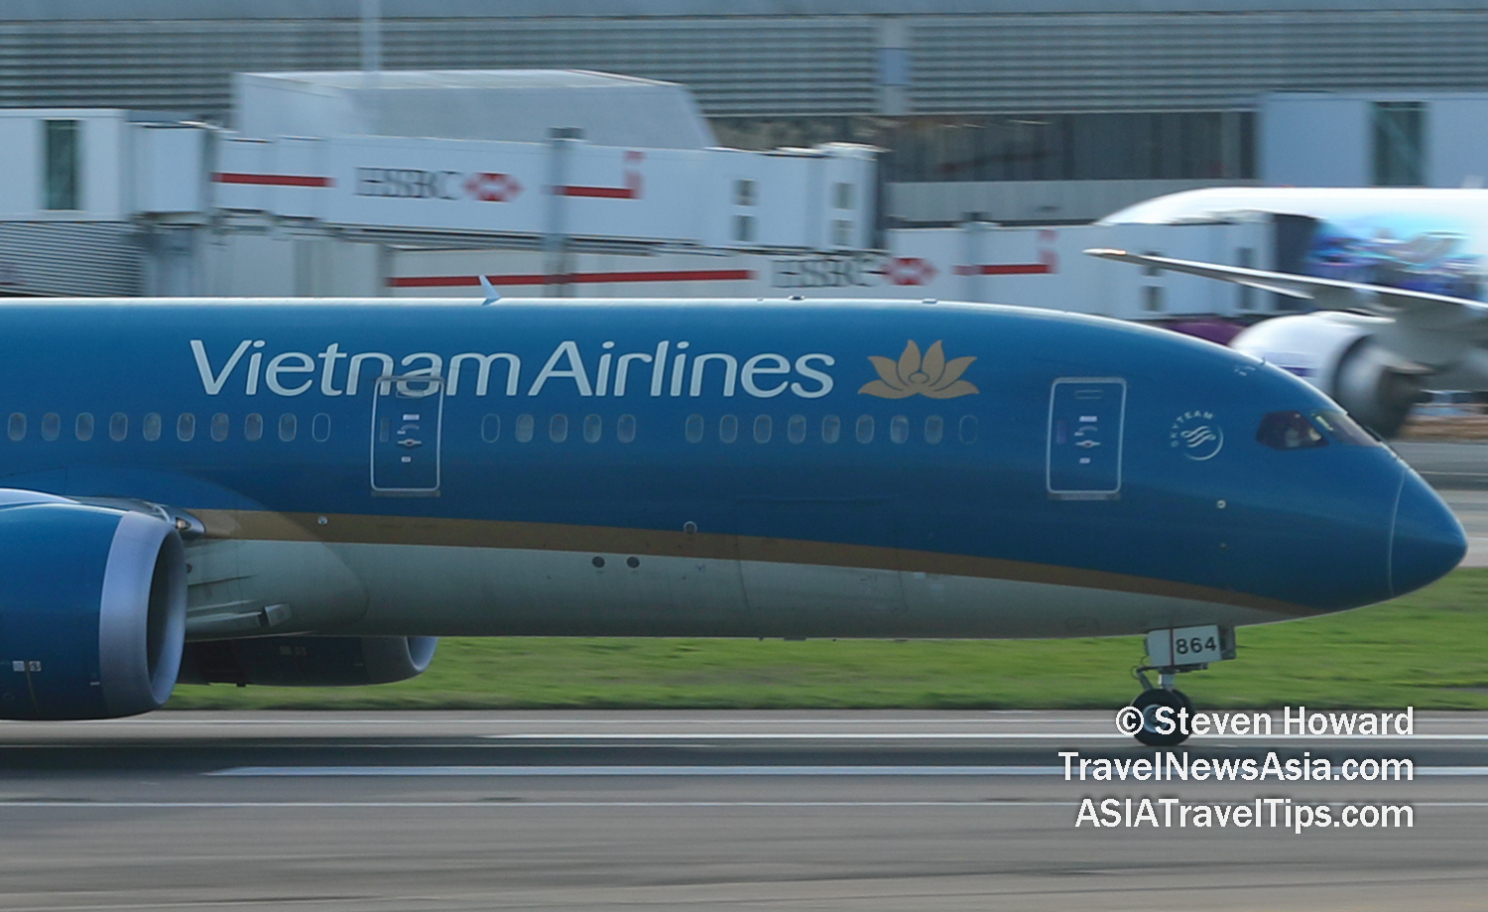 Vietnam Airlines Boeing 787-8 reg: VN-A864. Picture by Steven Howard of TravelNewsAsia.com Click to enlarge.